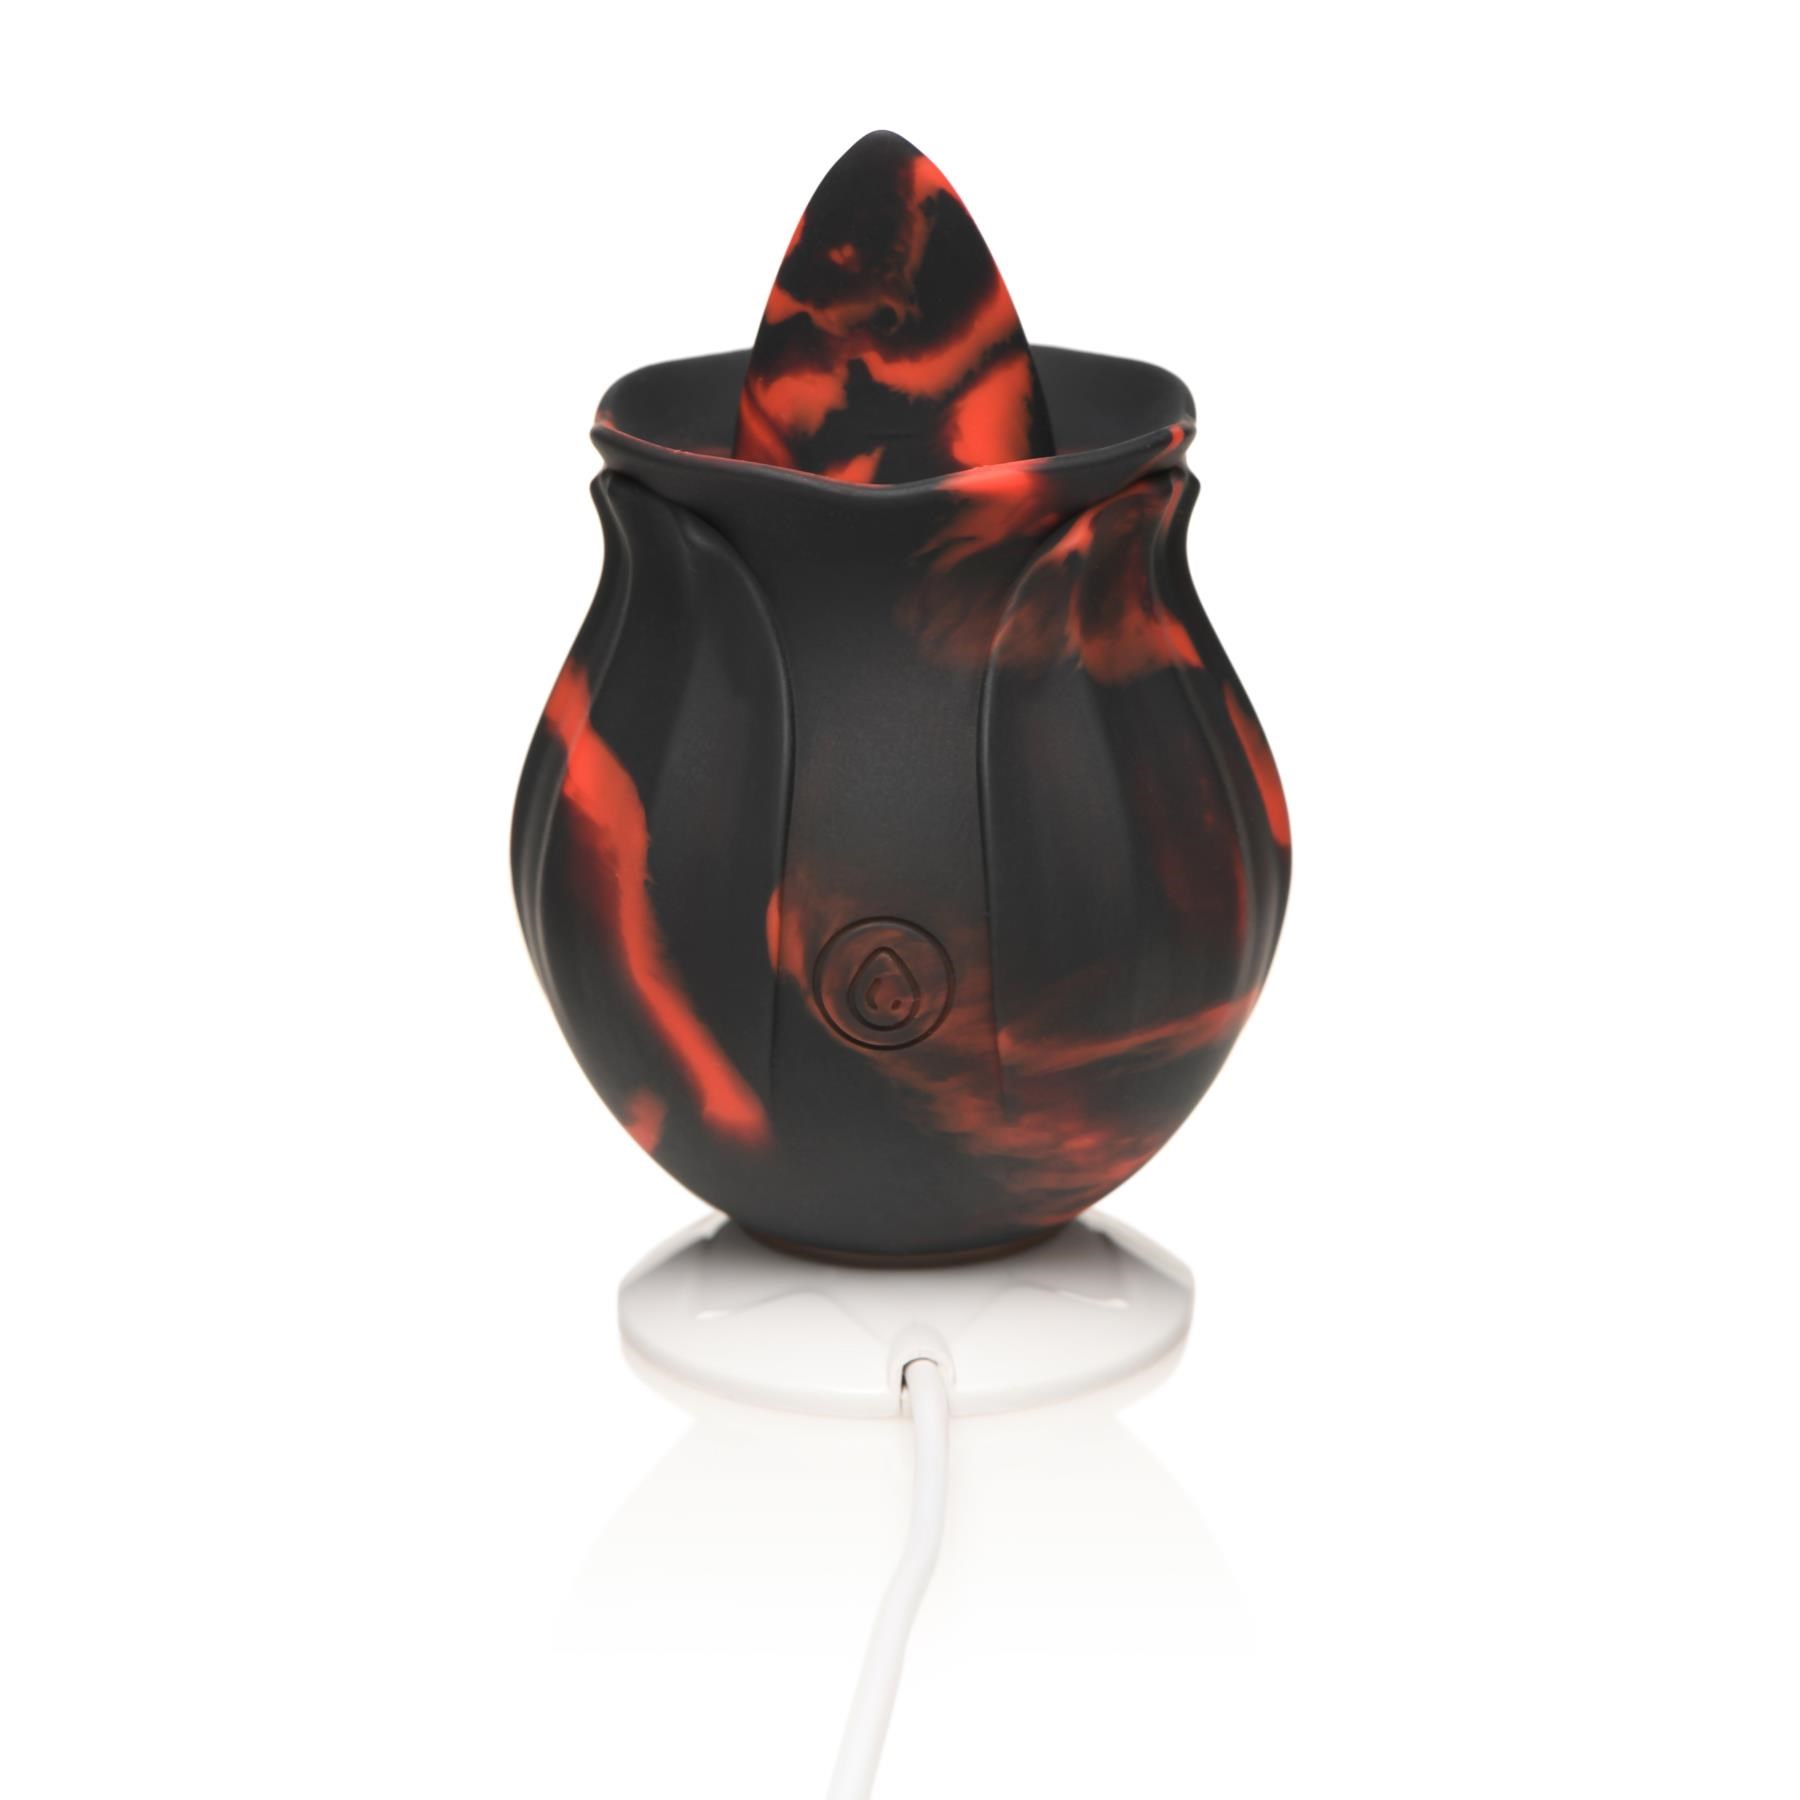 Bloomgasm Black Kiss Rimming Rose - Product on Charging Dock